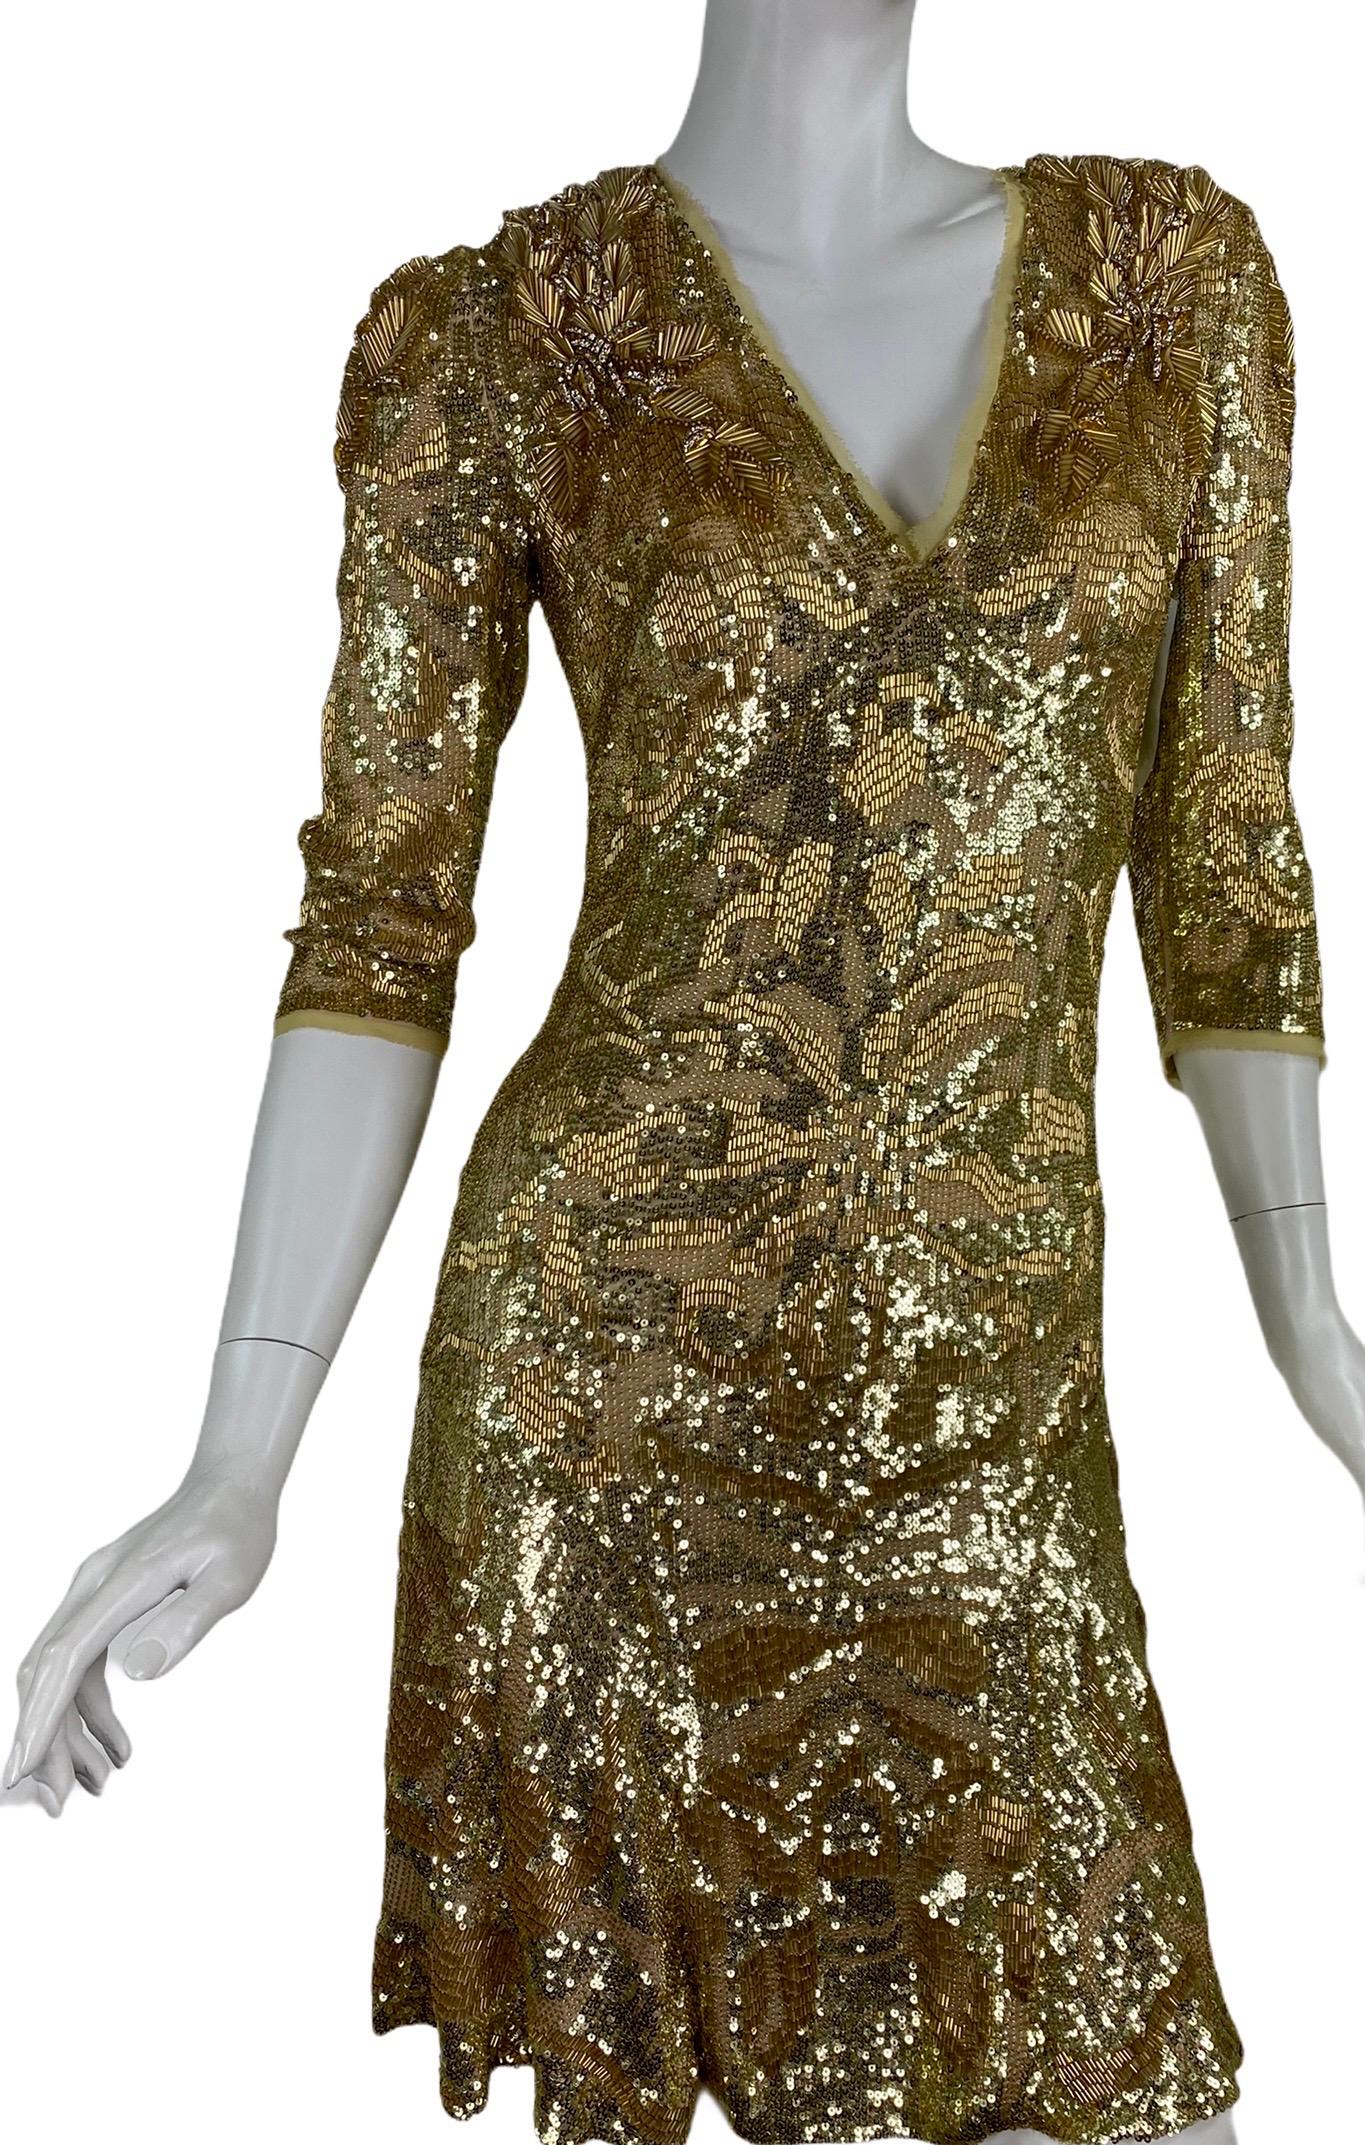 EMILIO PUCCI Embellished dress in Gold

Sequins beads and crystal 
V-neck 
3/4 sleeves
Content: 92% silk, 8% elastane

IT Size: 40 - US 4
Armpit to armpit: up to 18